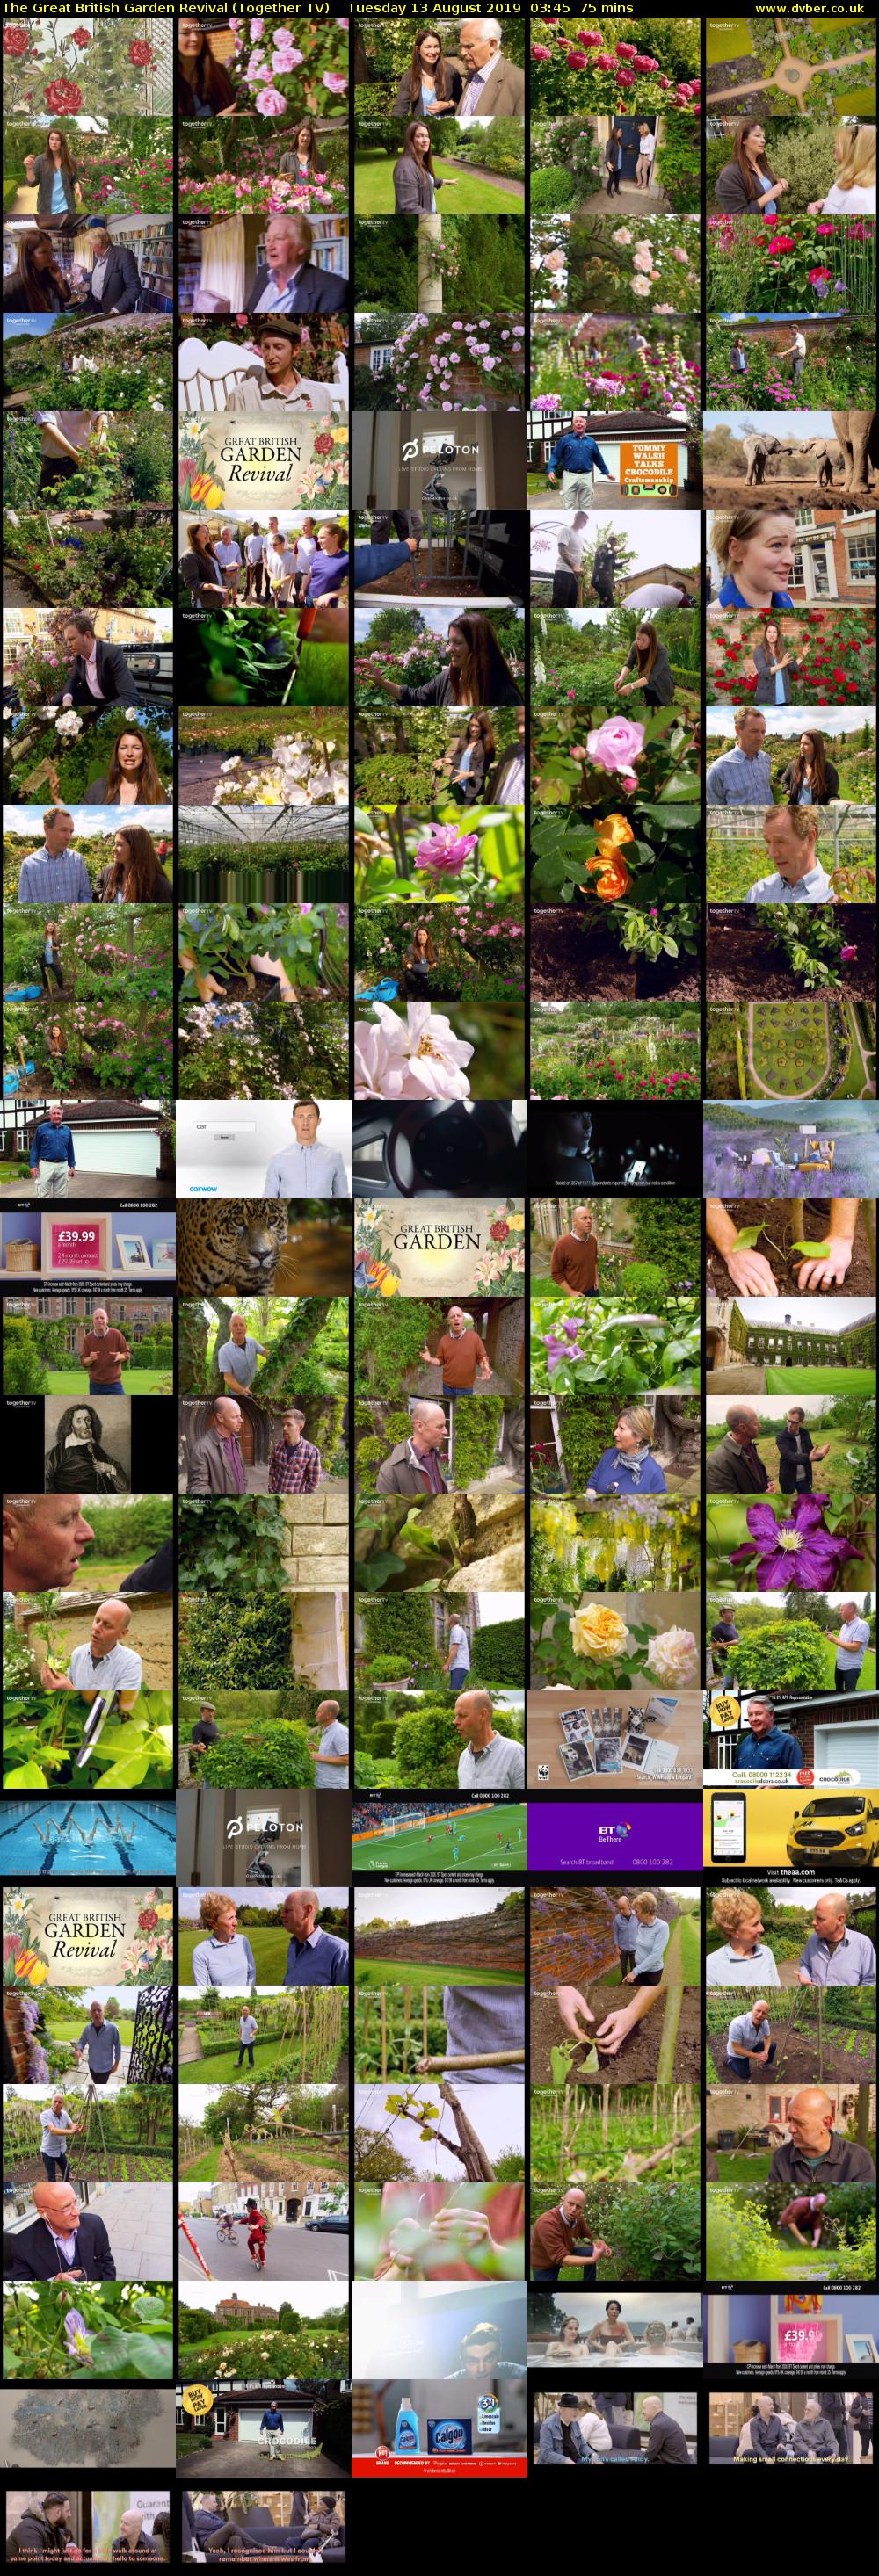 The Great British Garden Revival (Together TV) Tuesday 13 August 2019 03:45 - 05:00